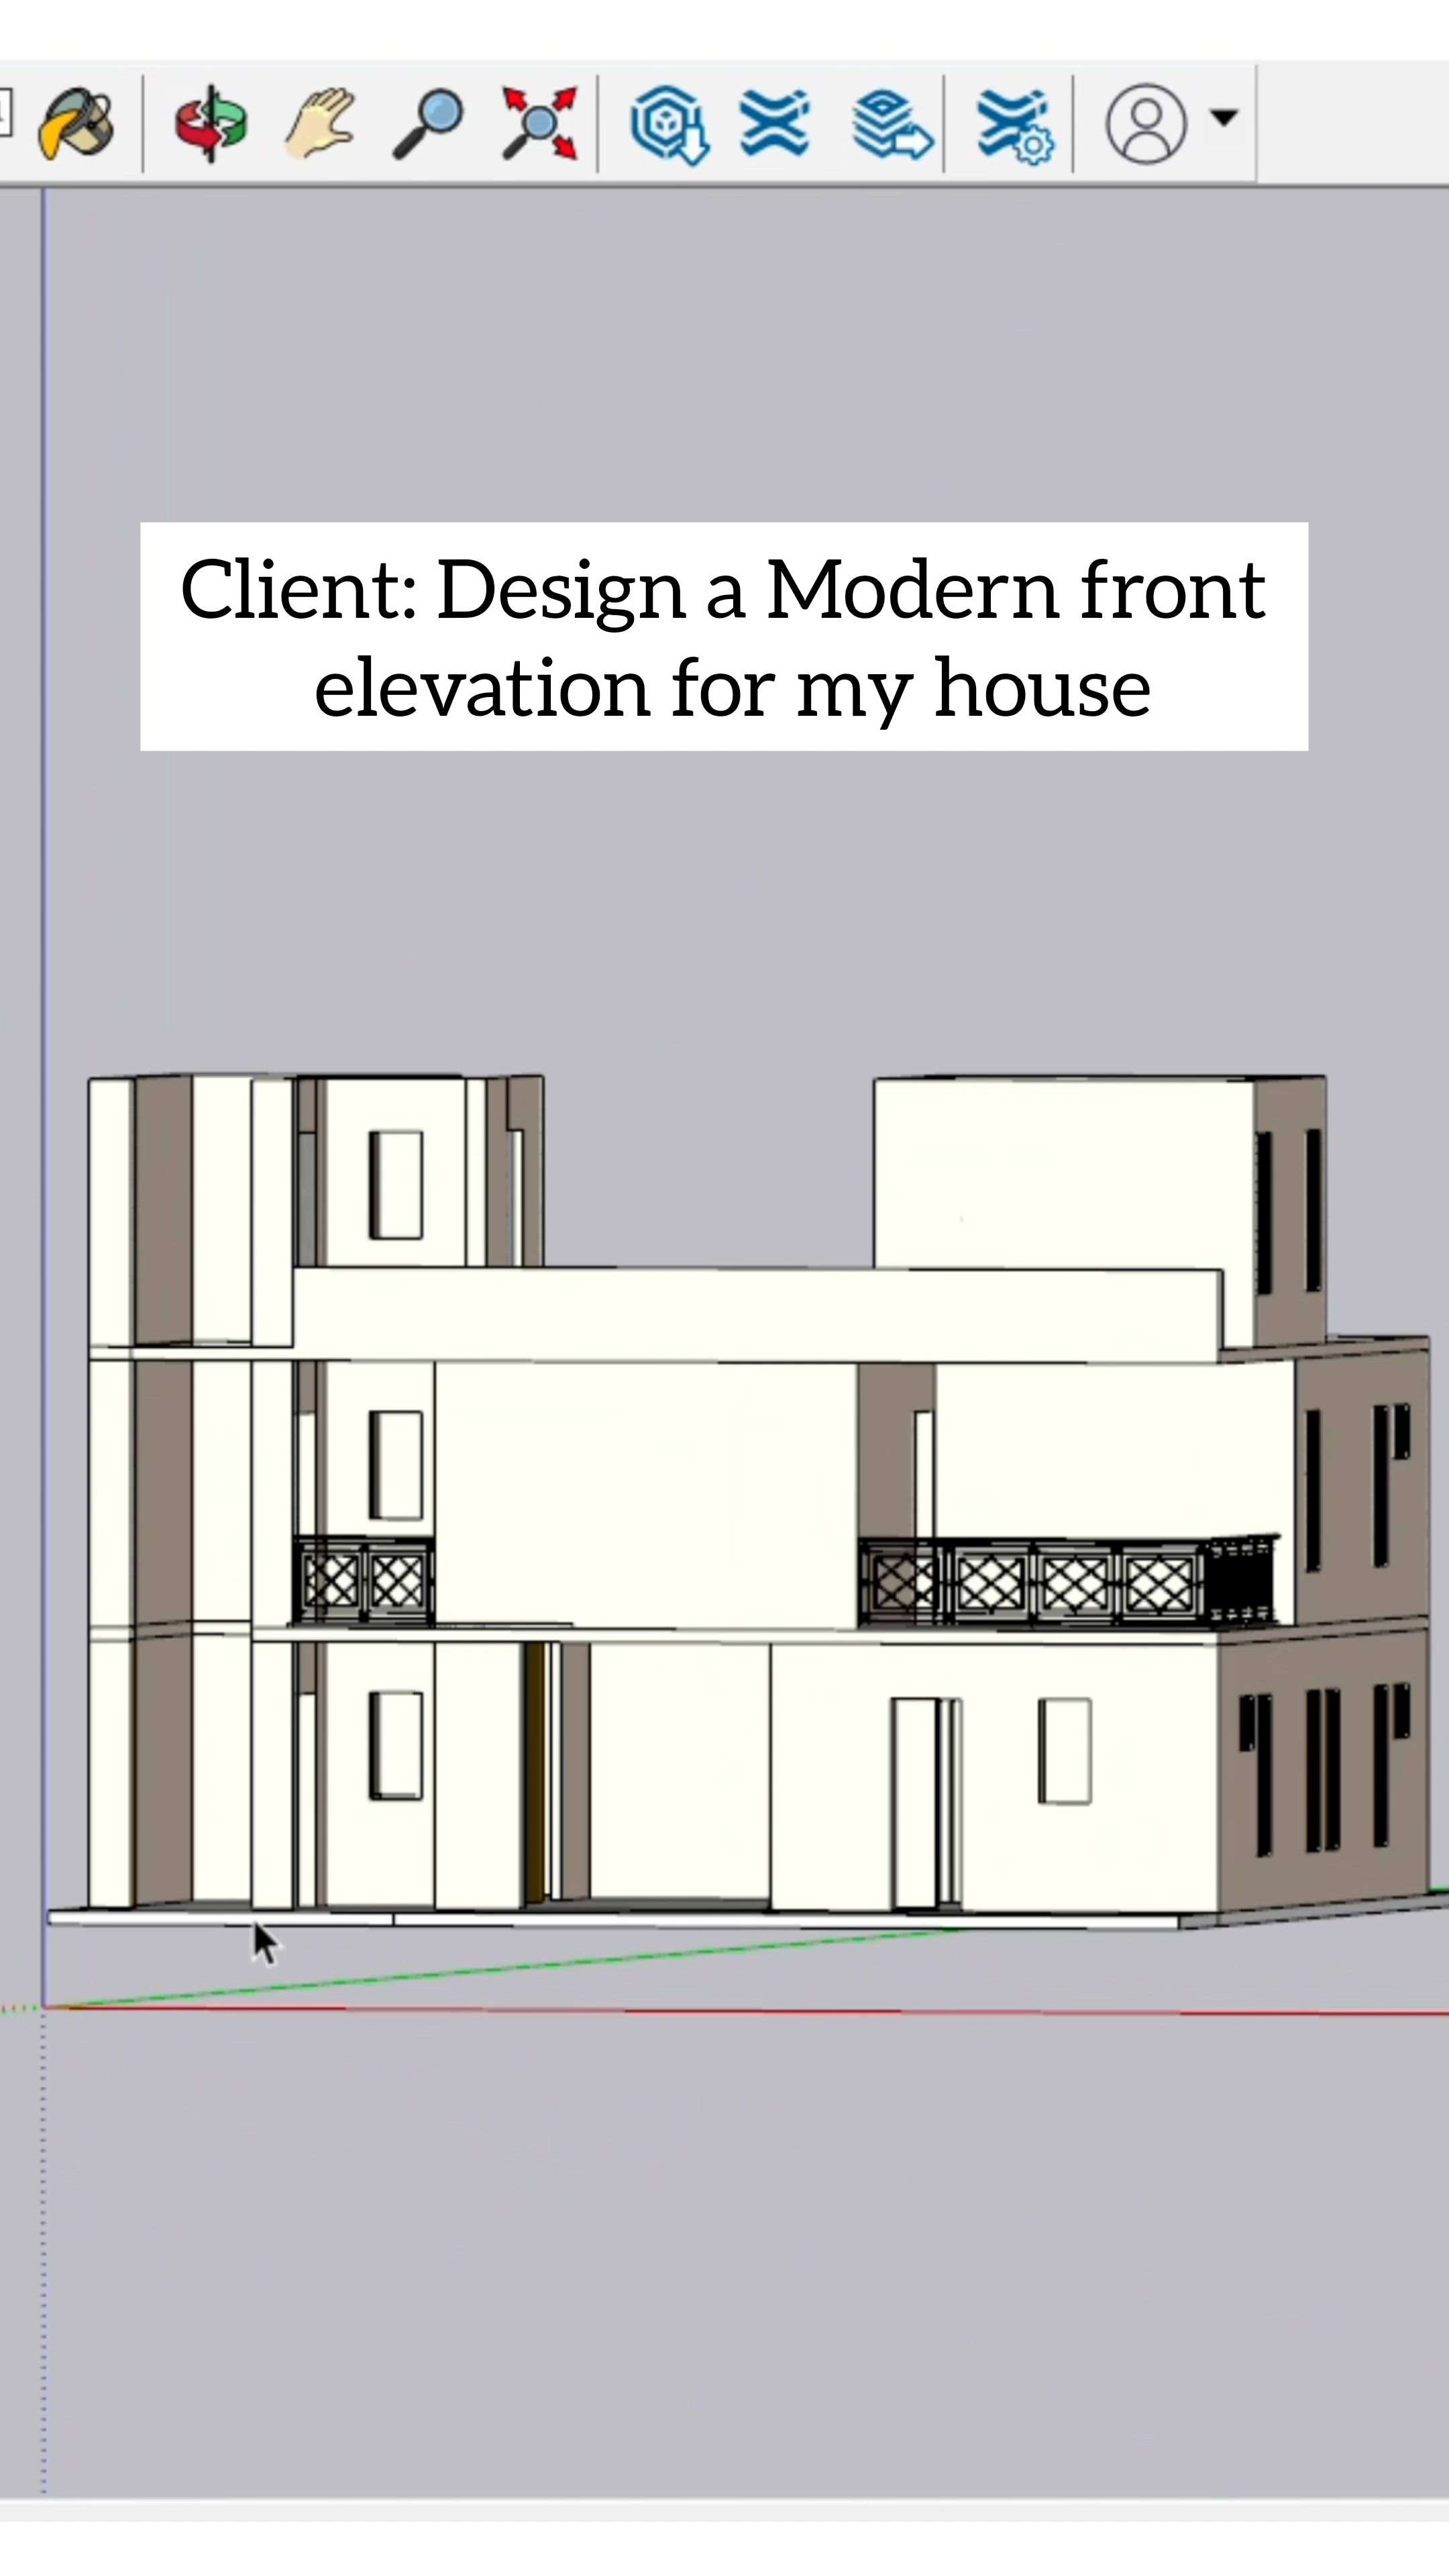 Front elevation design for our upcoming 2000 sqft Residential (Architecture and interiors) project in Haryana. 

In our design we aimed for a modern and dynamic look, as the client demanded. We blended different materials such as wood, concrete and glass to achieve this elevation. 

Contact us to get your projects done.

Dm for enquiries or call us at ☎️
+91 97038 36000 
+91 81787 08086

 
.
.
.
.
#frontelevation #elevationdesign #elevationideas #3delevation #frontfacade #modernfacade #modernelevation #viral #archigram #archtecturedesign #architecturestudio #archilovers